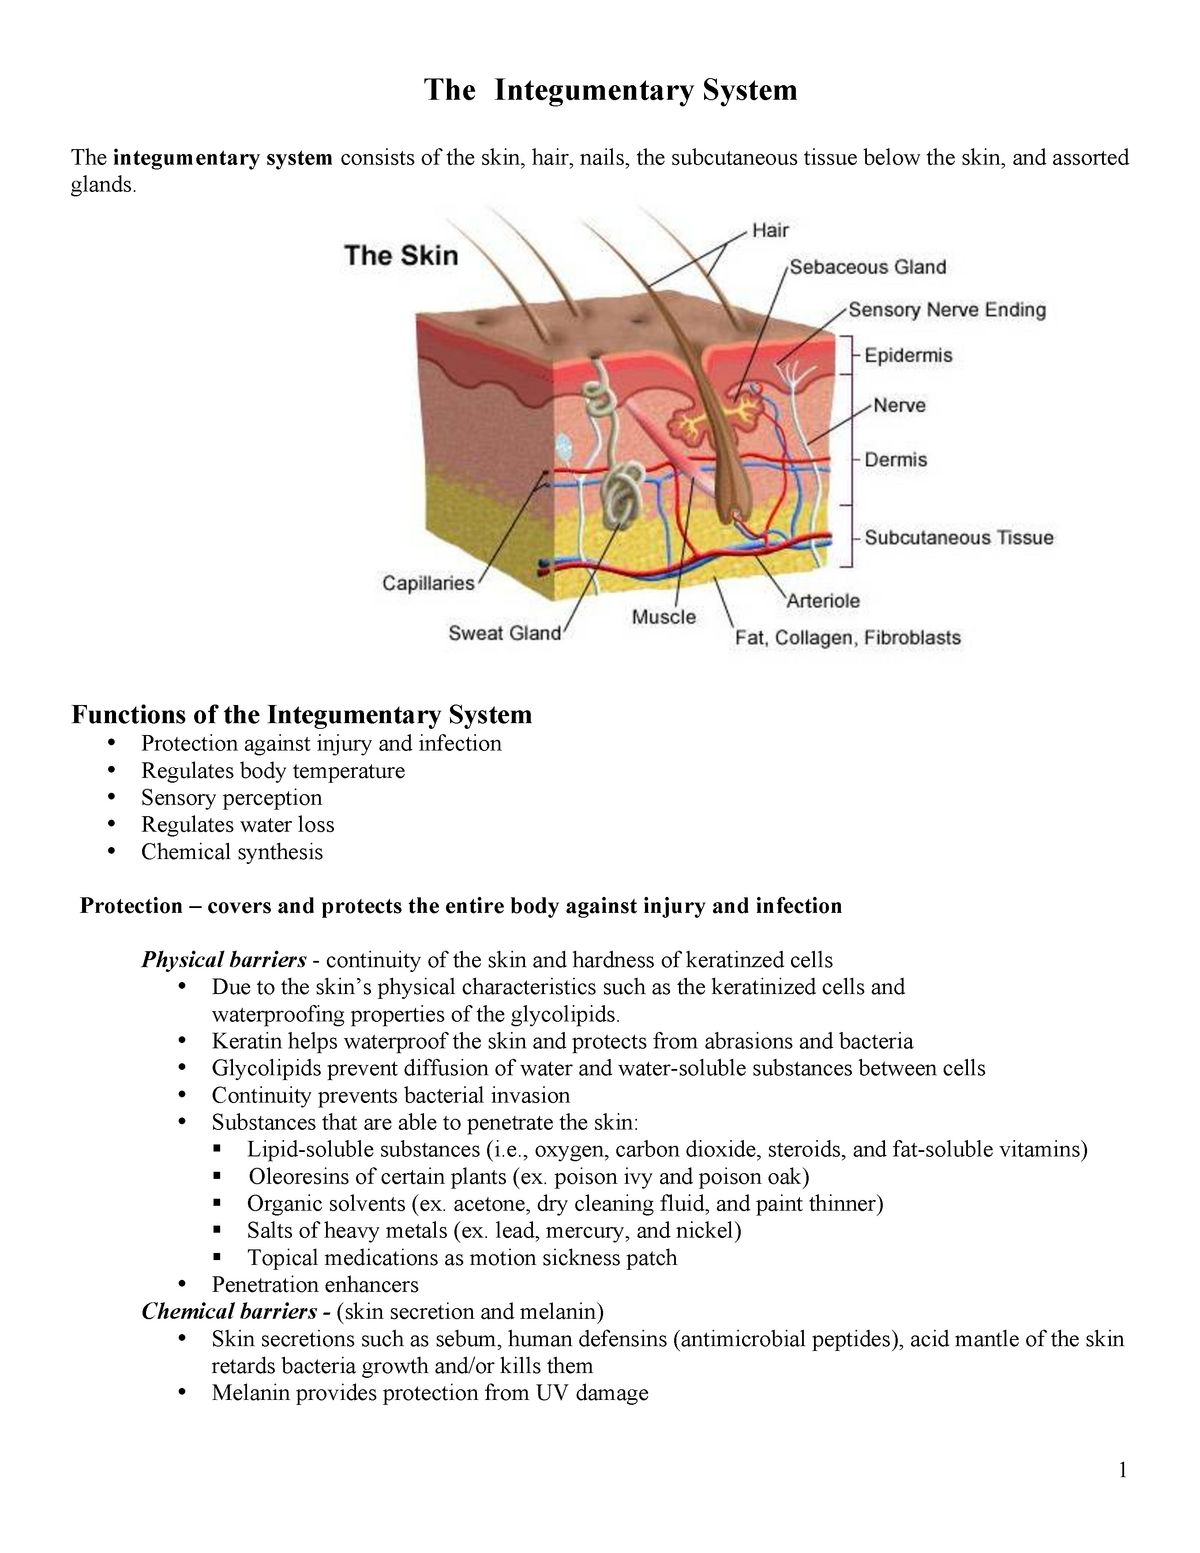 ngn case study 1 integumentary